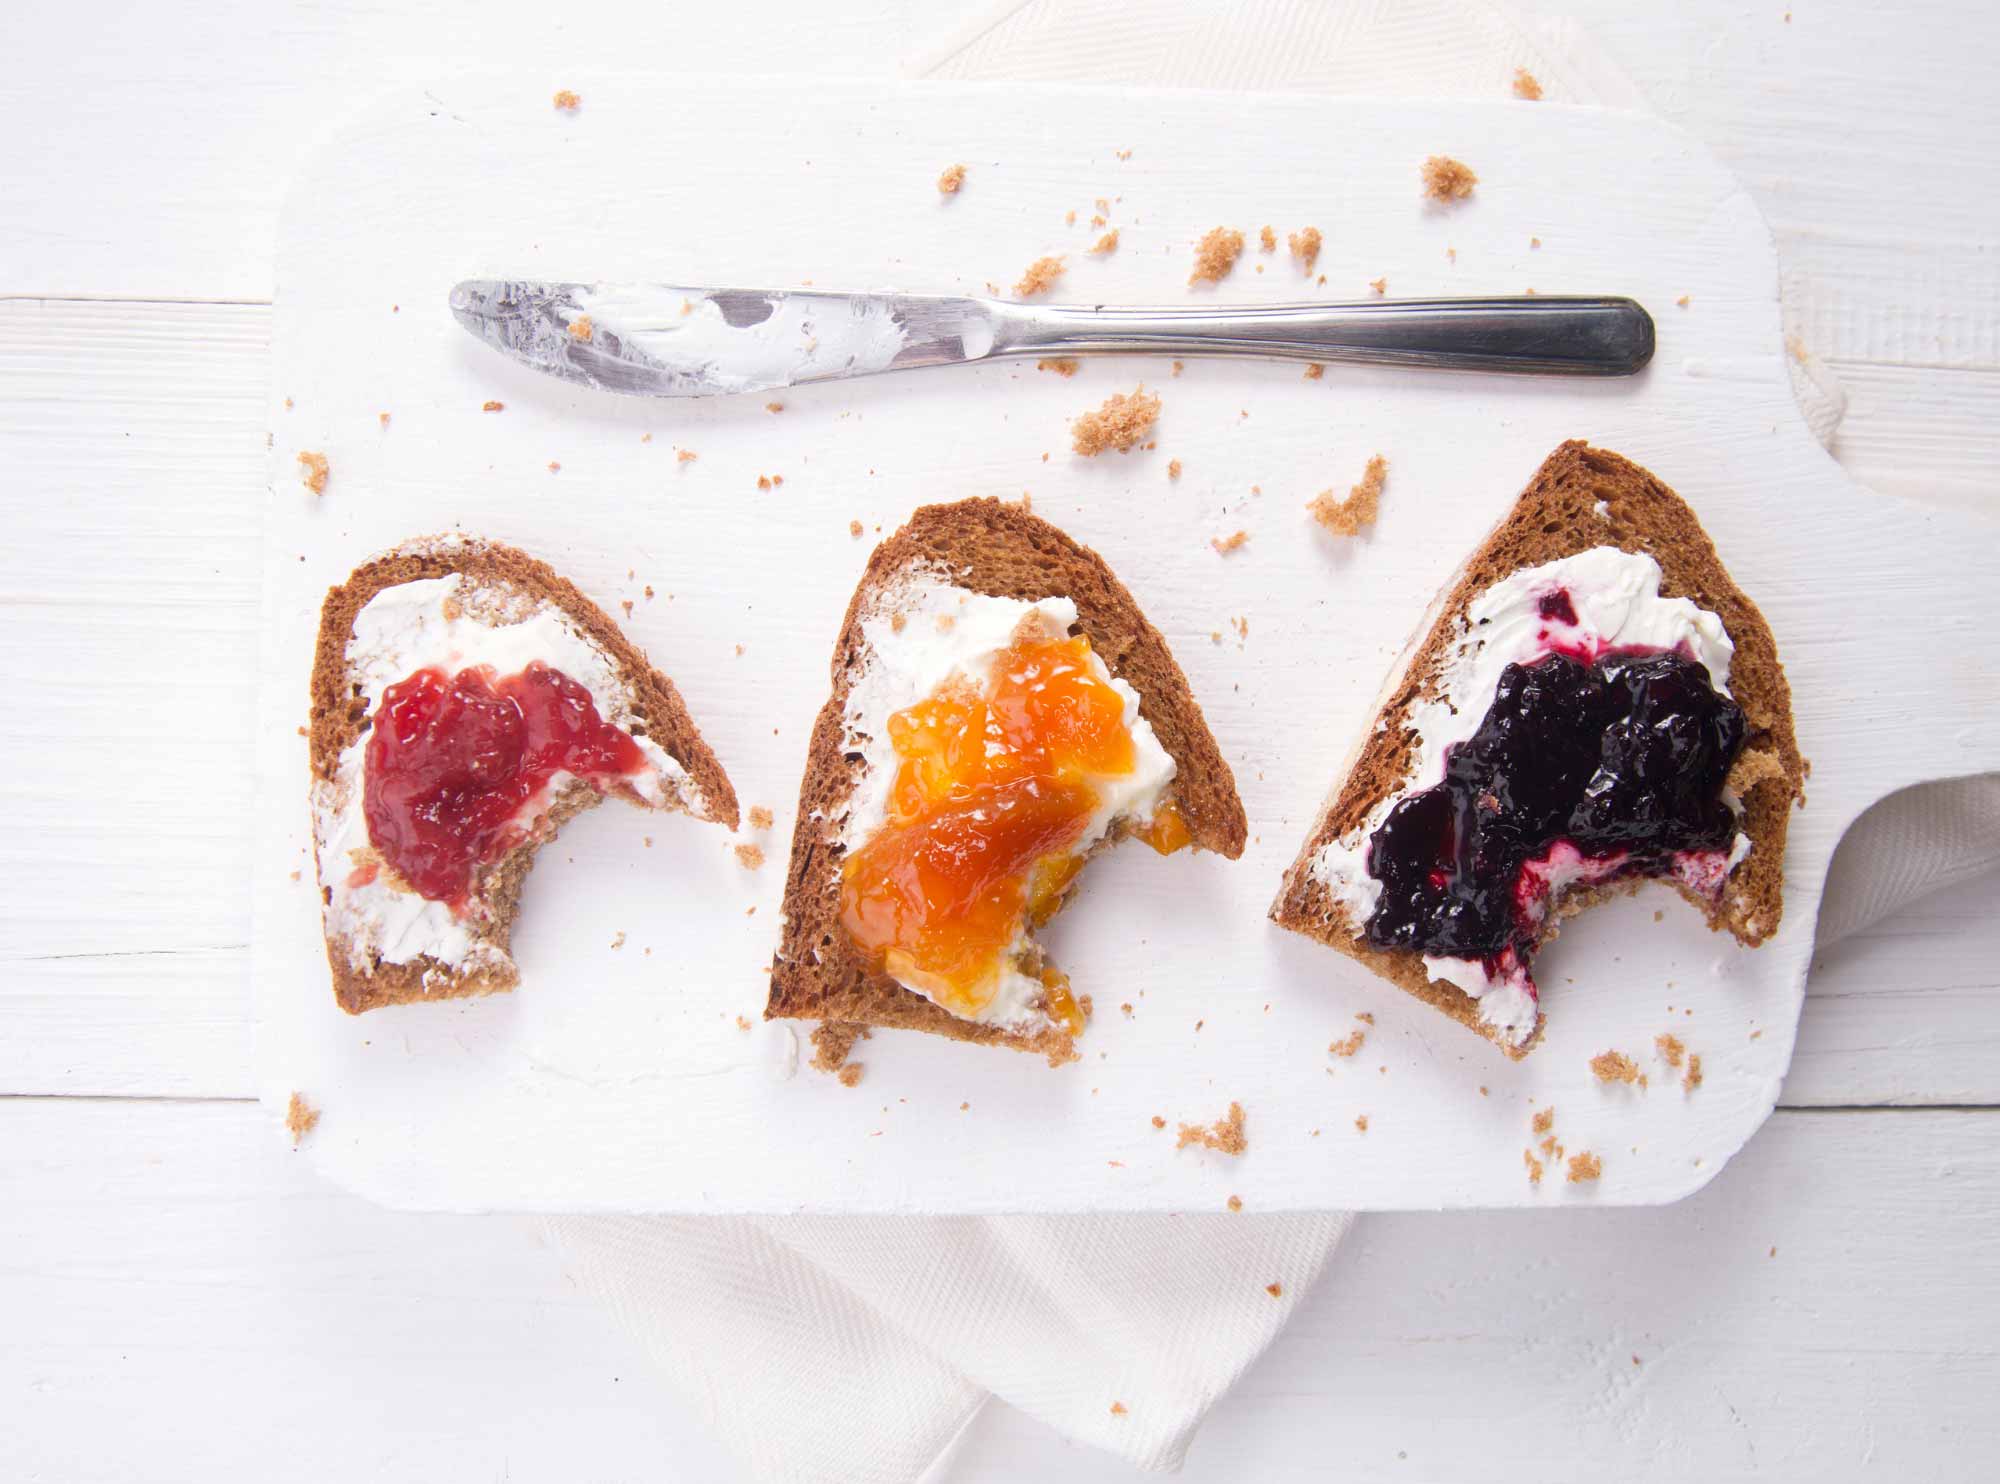 Three bitten slices of bread spread with rosehip jam, apricot jam and bilberry jam